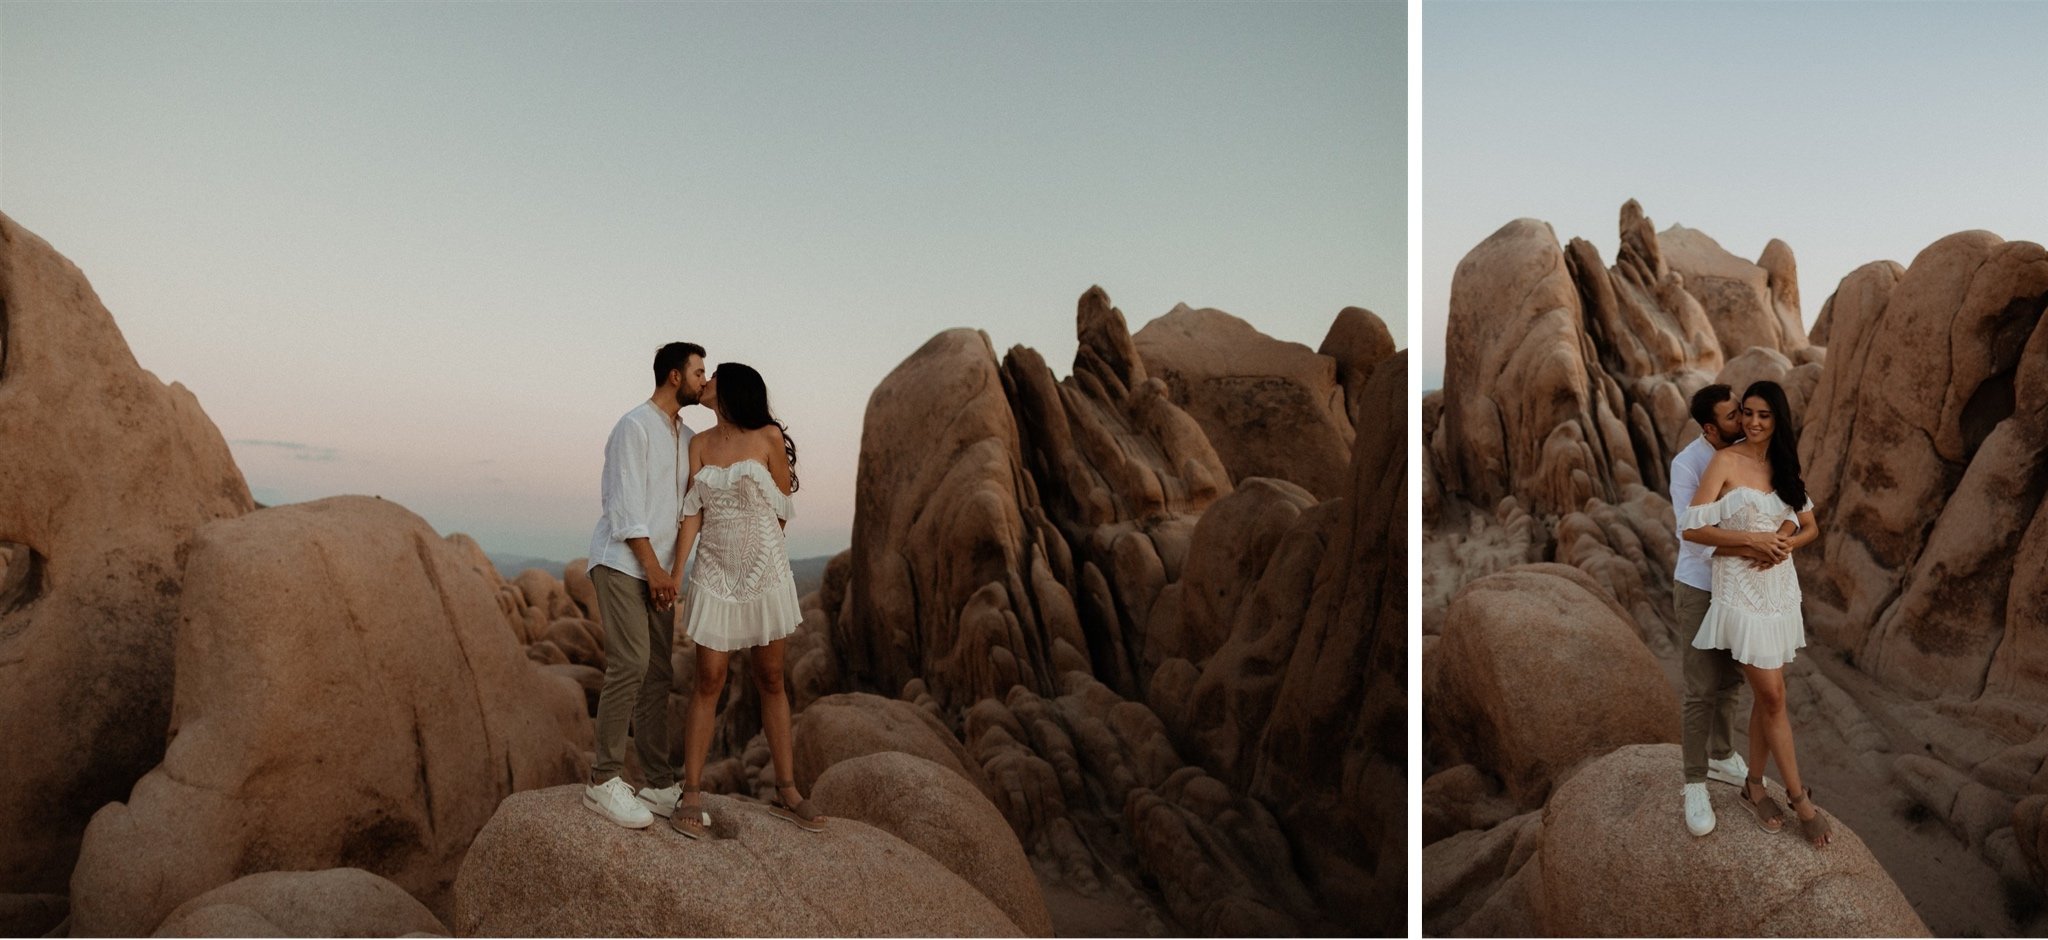 Joshua Tree Couples Session Surprise Proposal - Will Khoury Photography_44.jpg